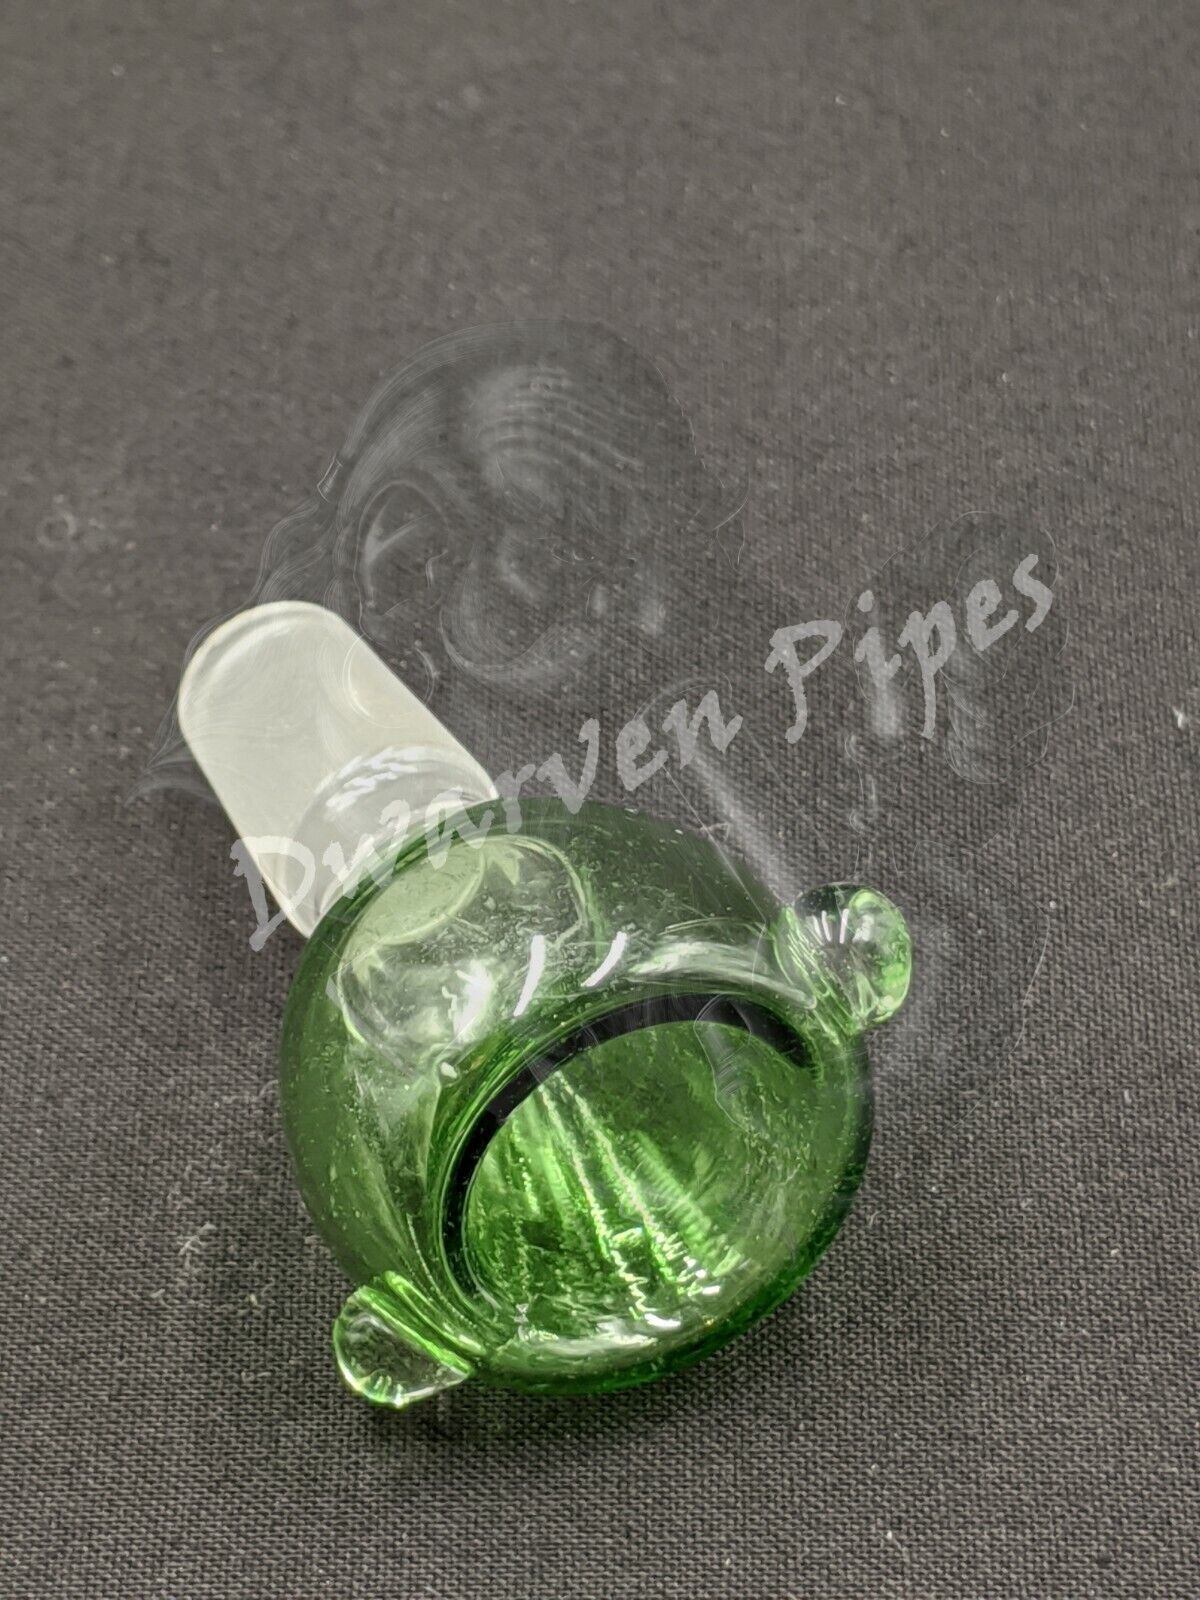 14mm Male Slide Bowl Glass for Water Pipes - Round Green